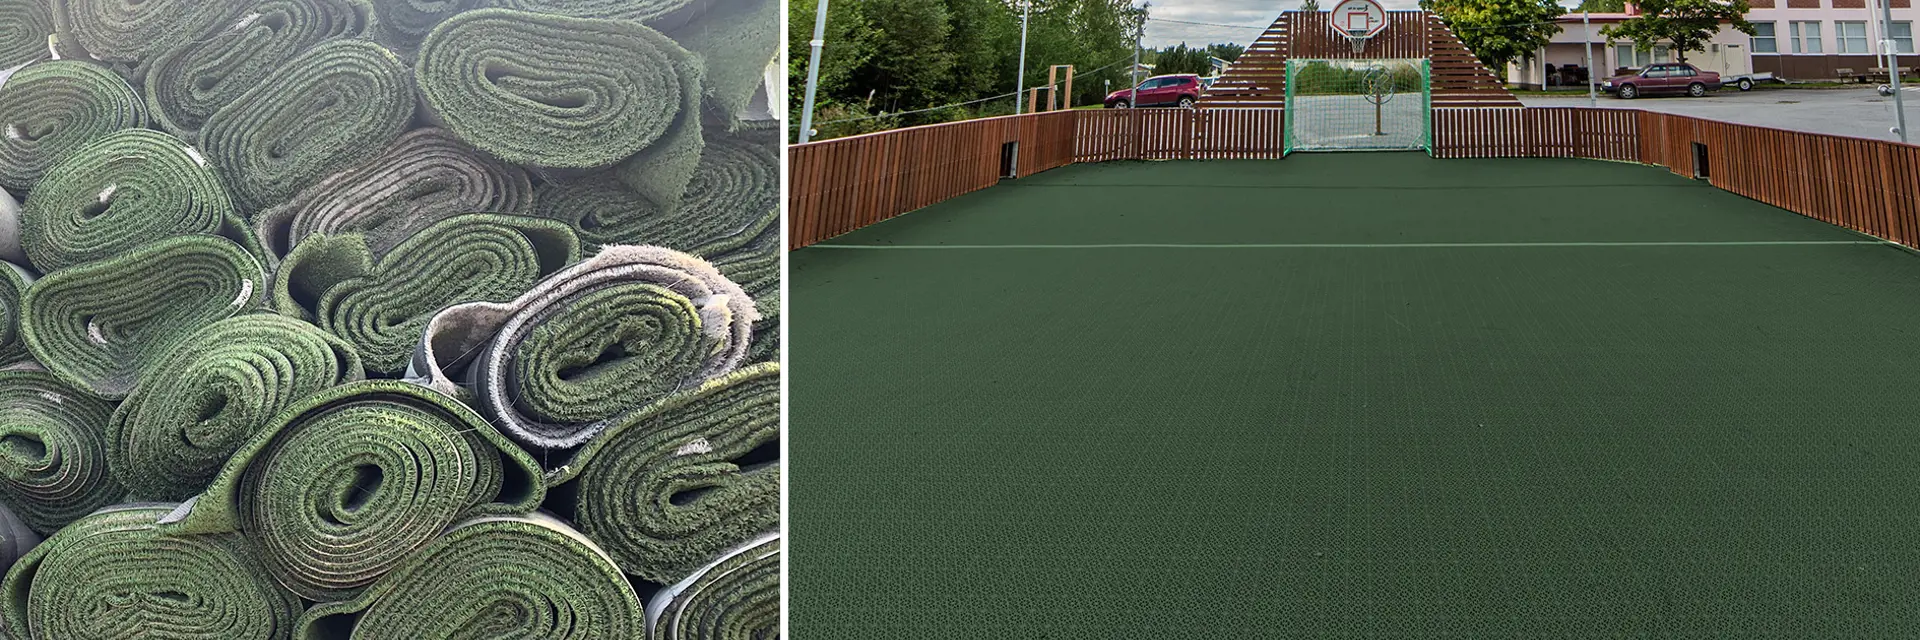 Recycled Turf Bergo Sport Court Montage